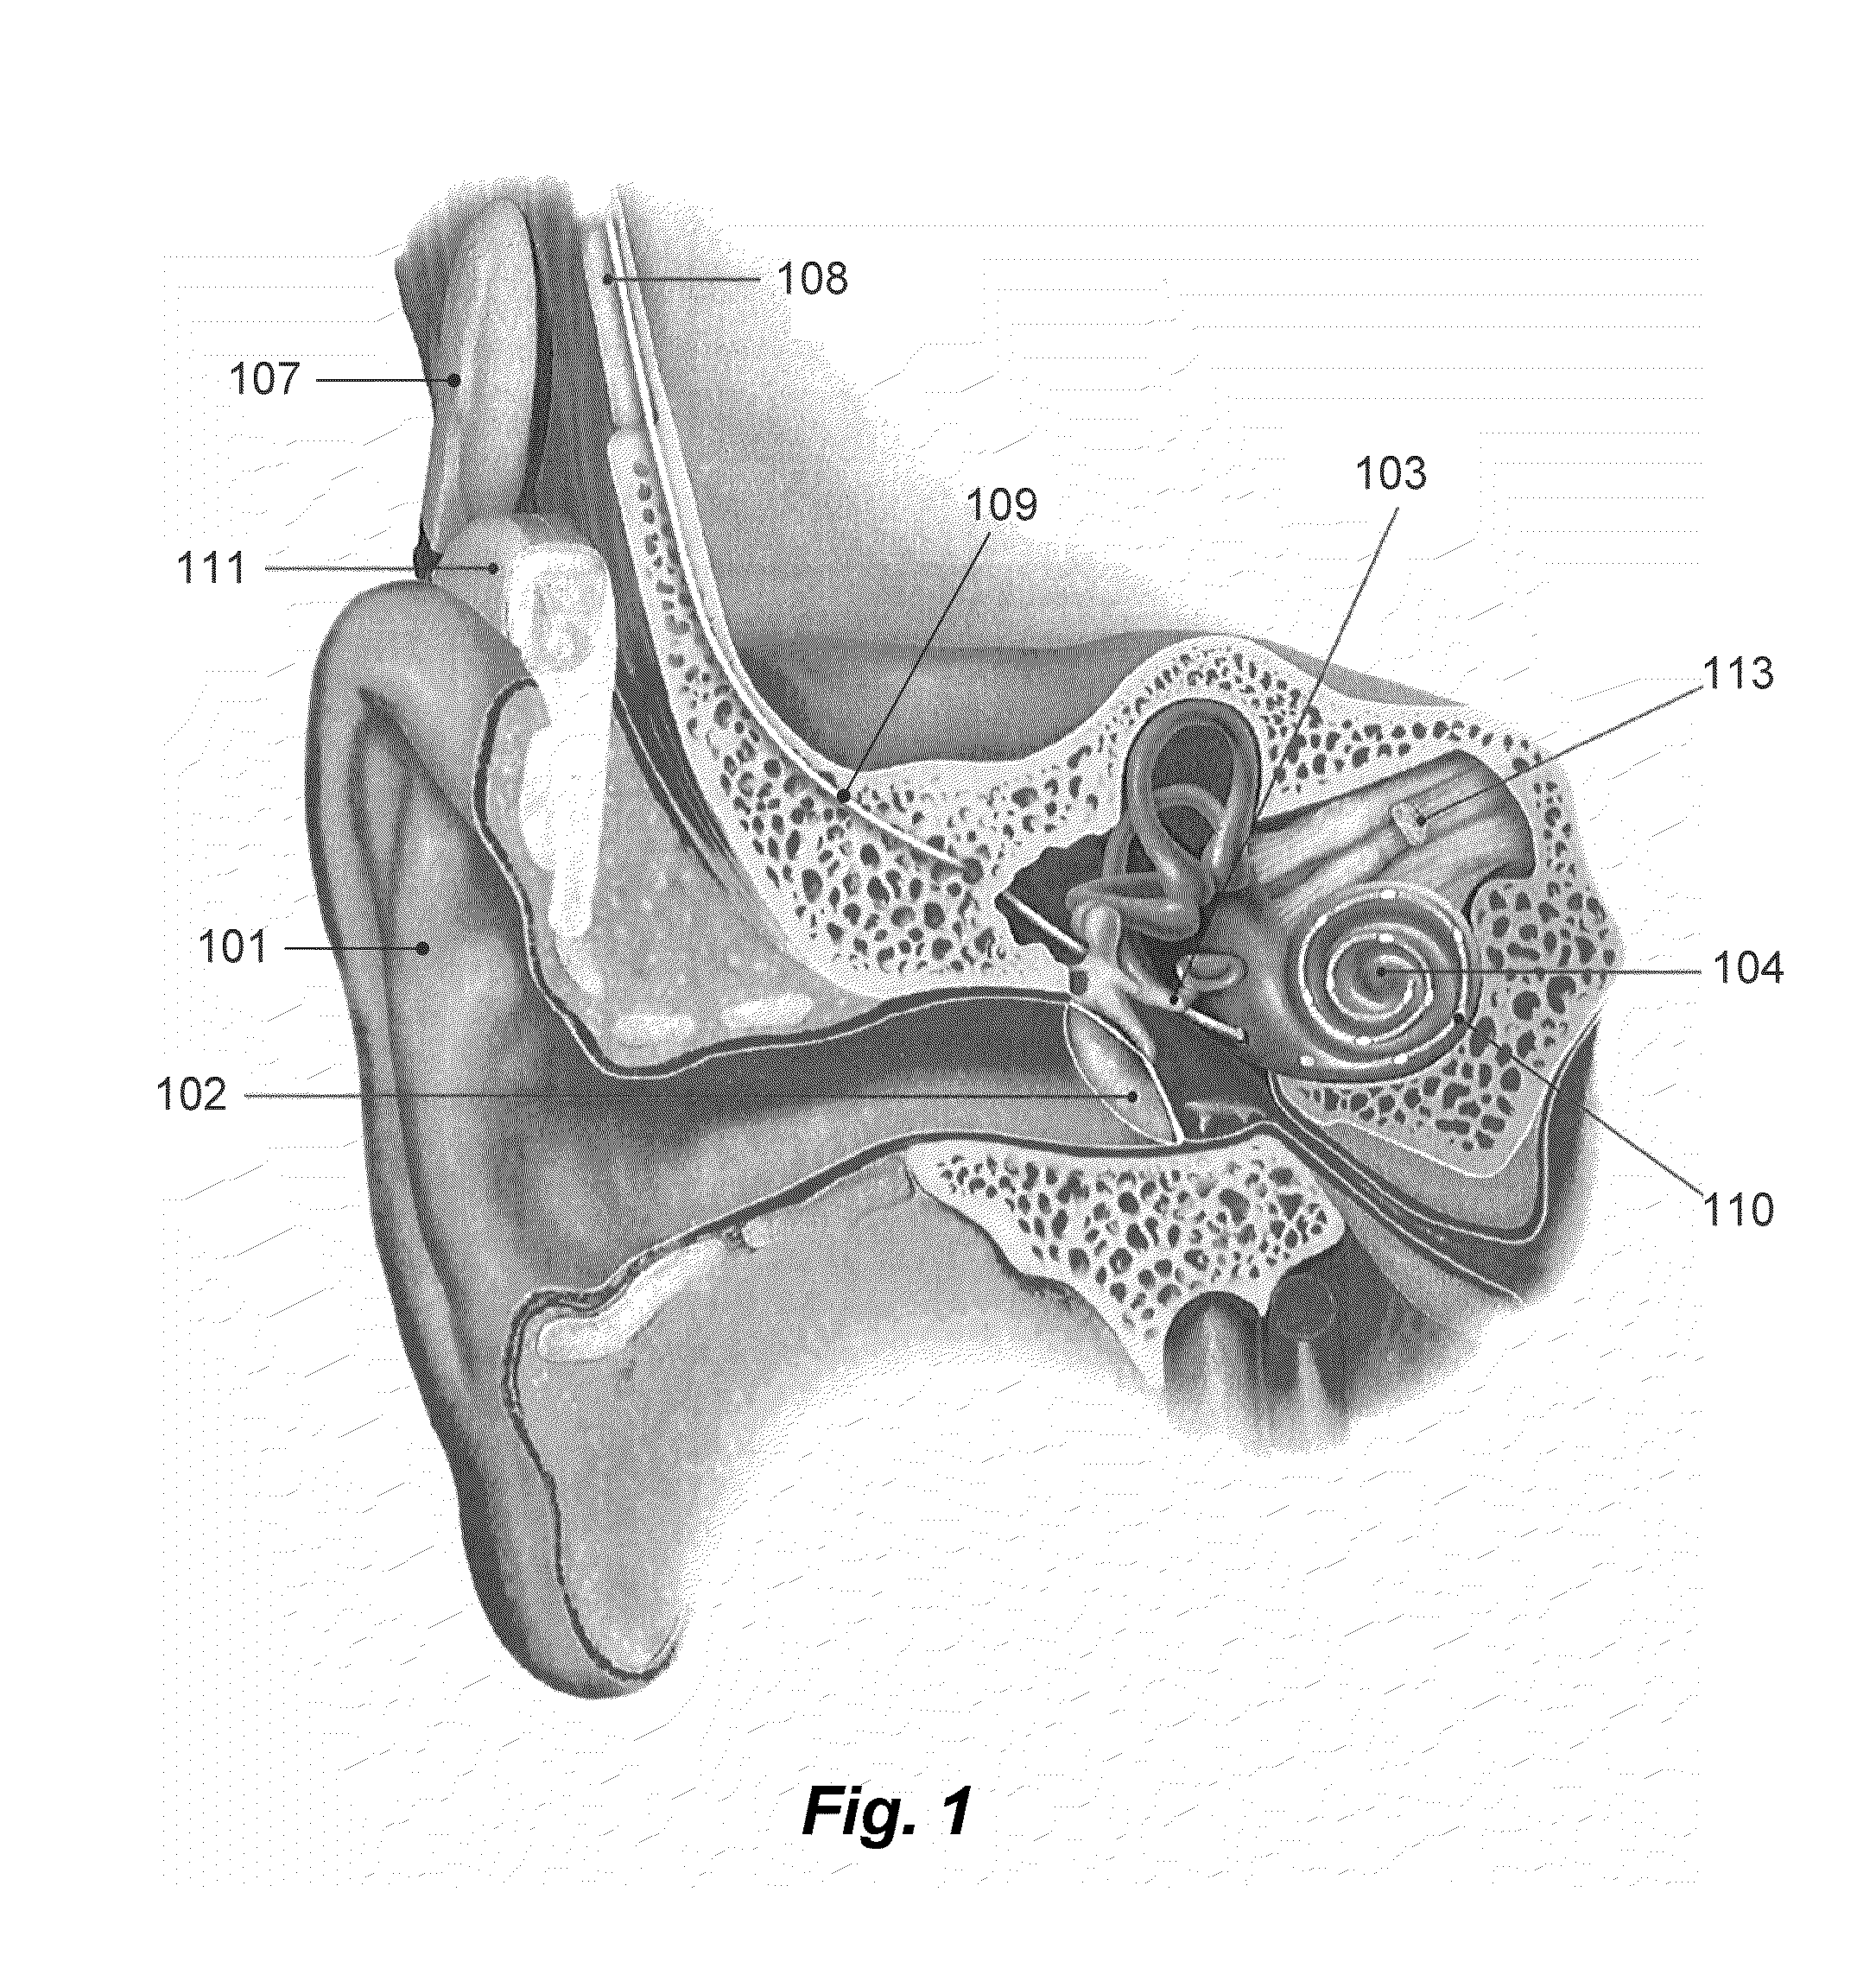 Method for fitting a cochlear implant with patient feedback